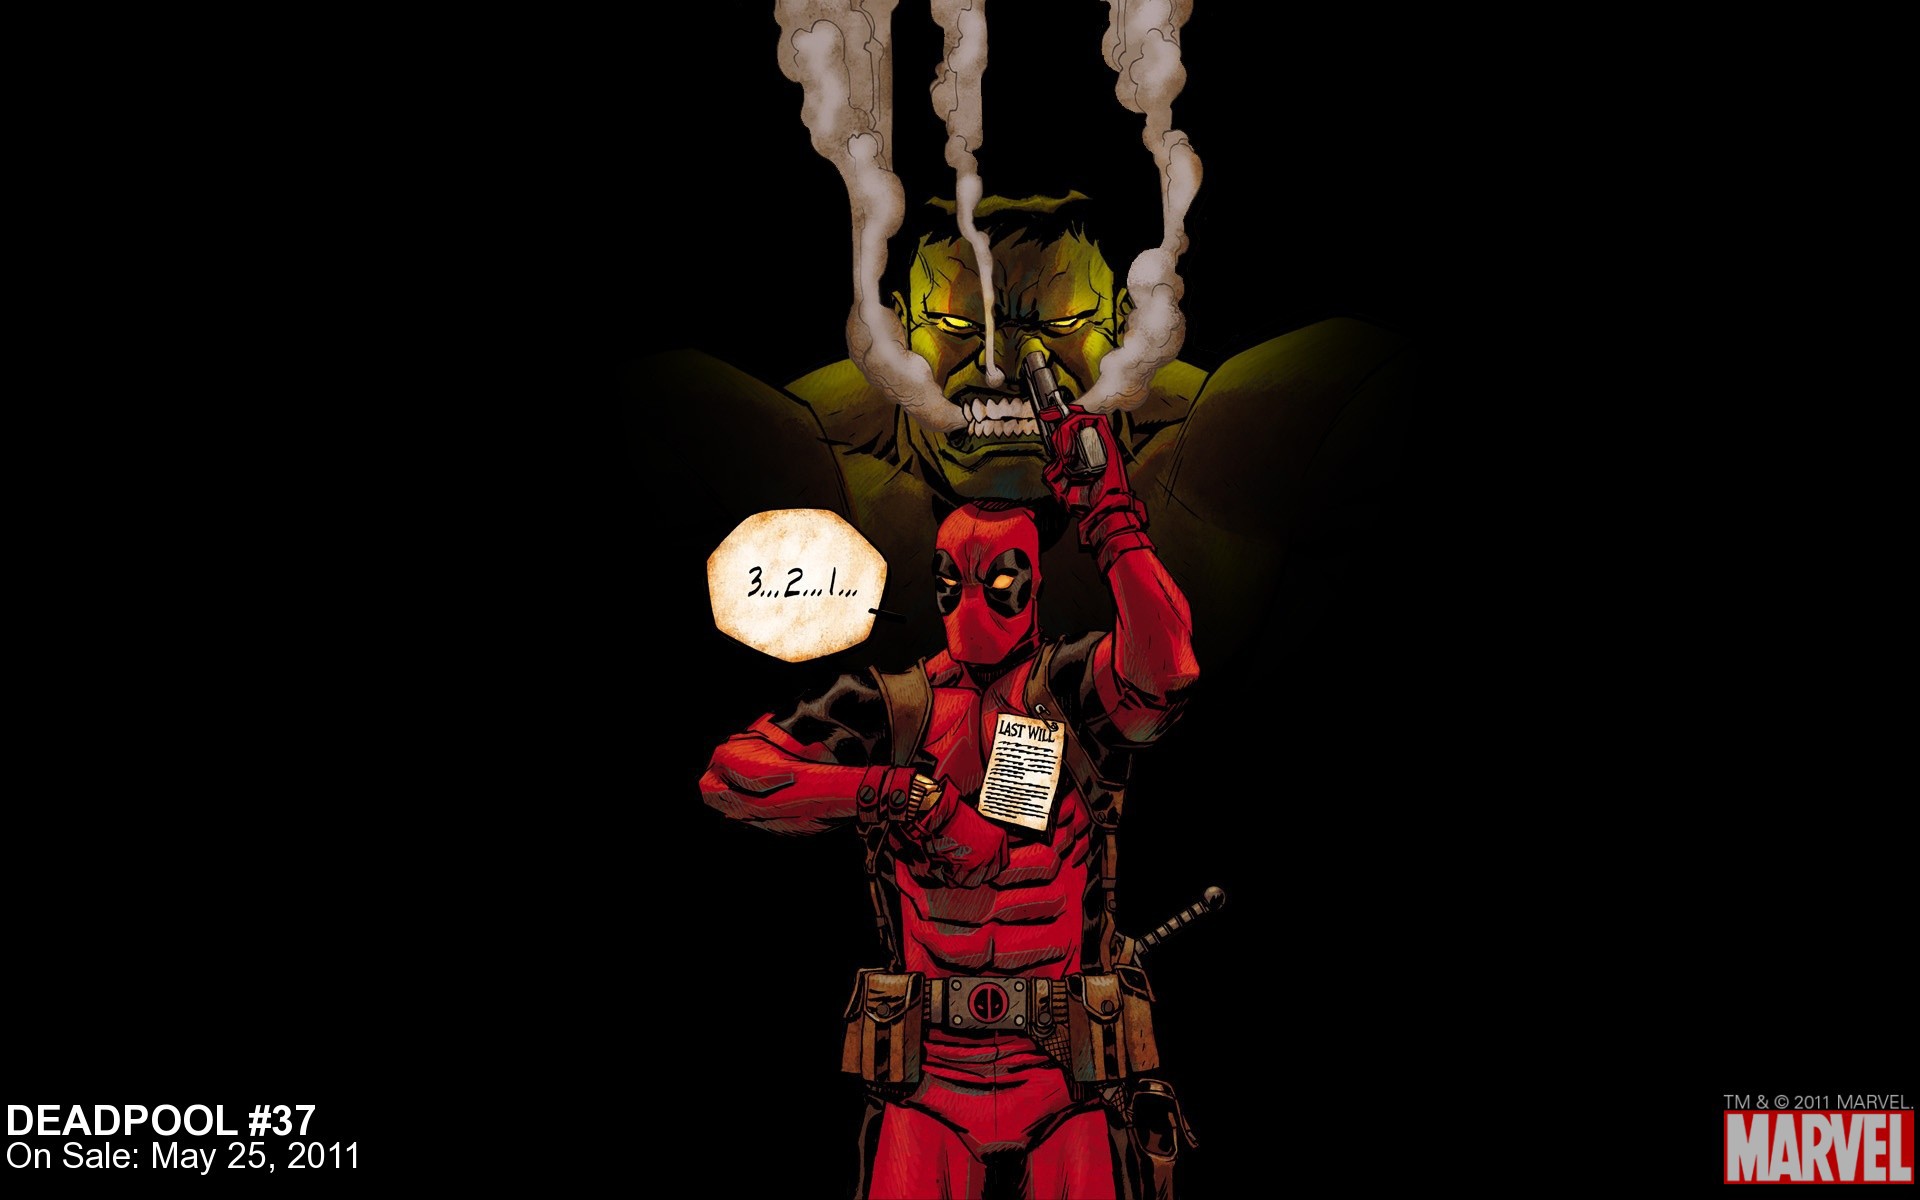 27 Deadpool  wallpapers    Download  free cool full HD  